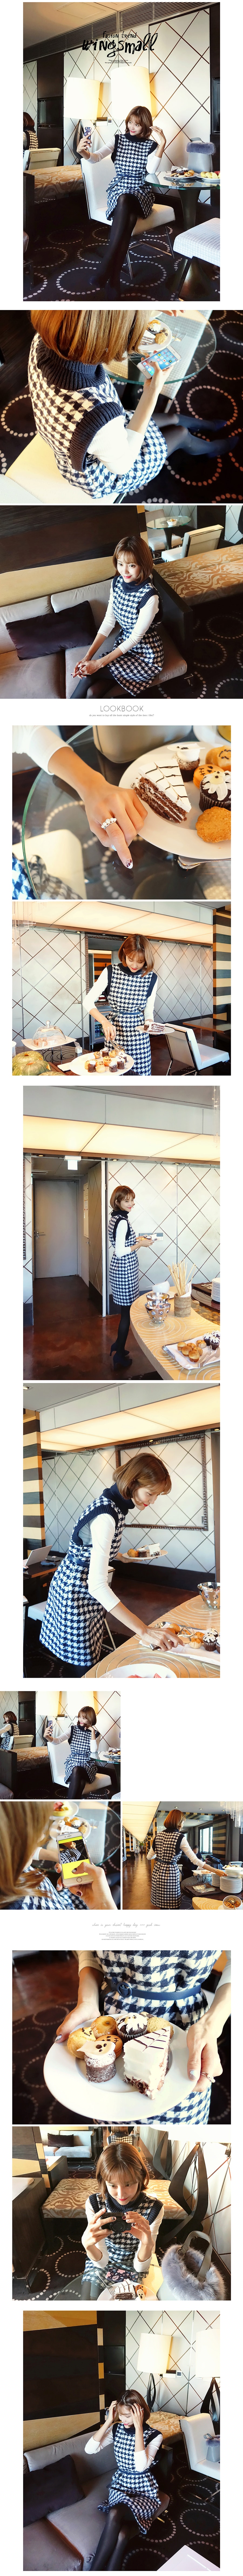 [2017 F/W] Ribbed Knit Top White and Houndstooth Turtleneck Dress Navy with Belt 3 pieces Set One Size(S-M)